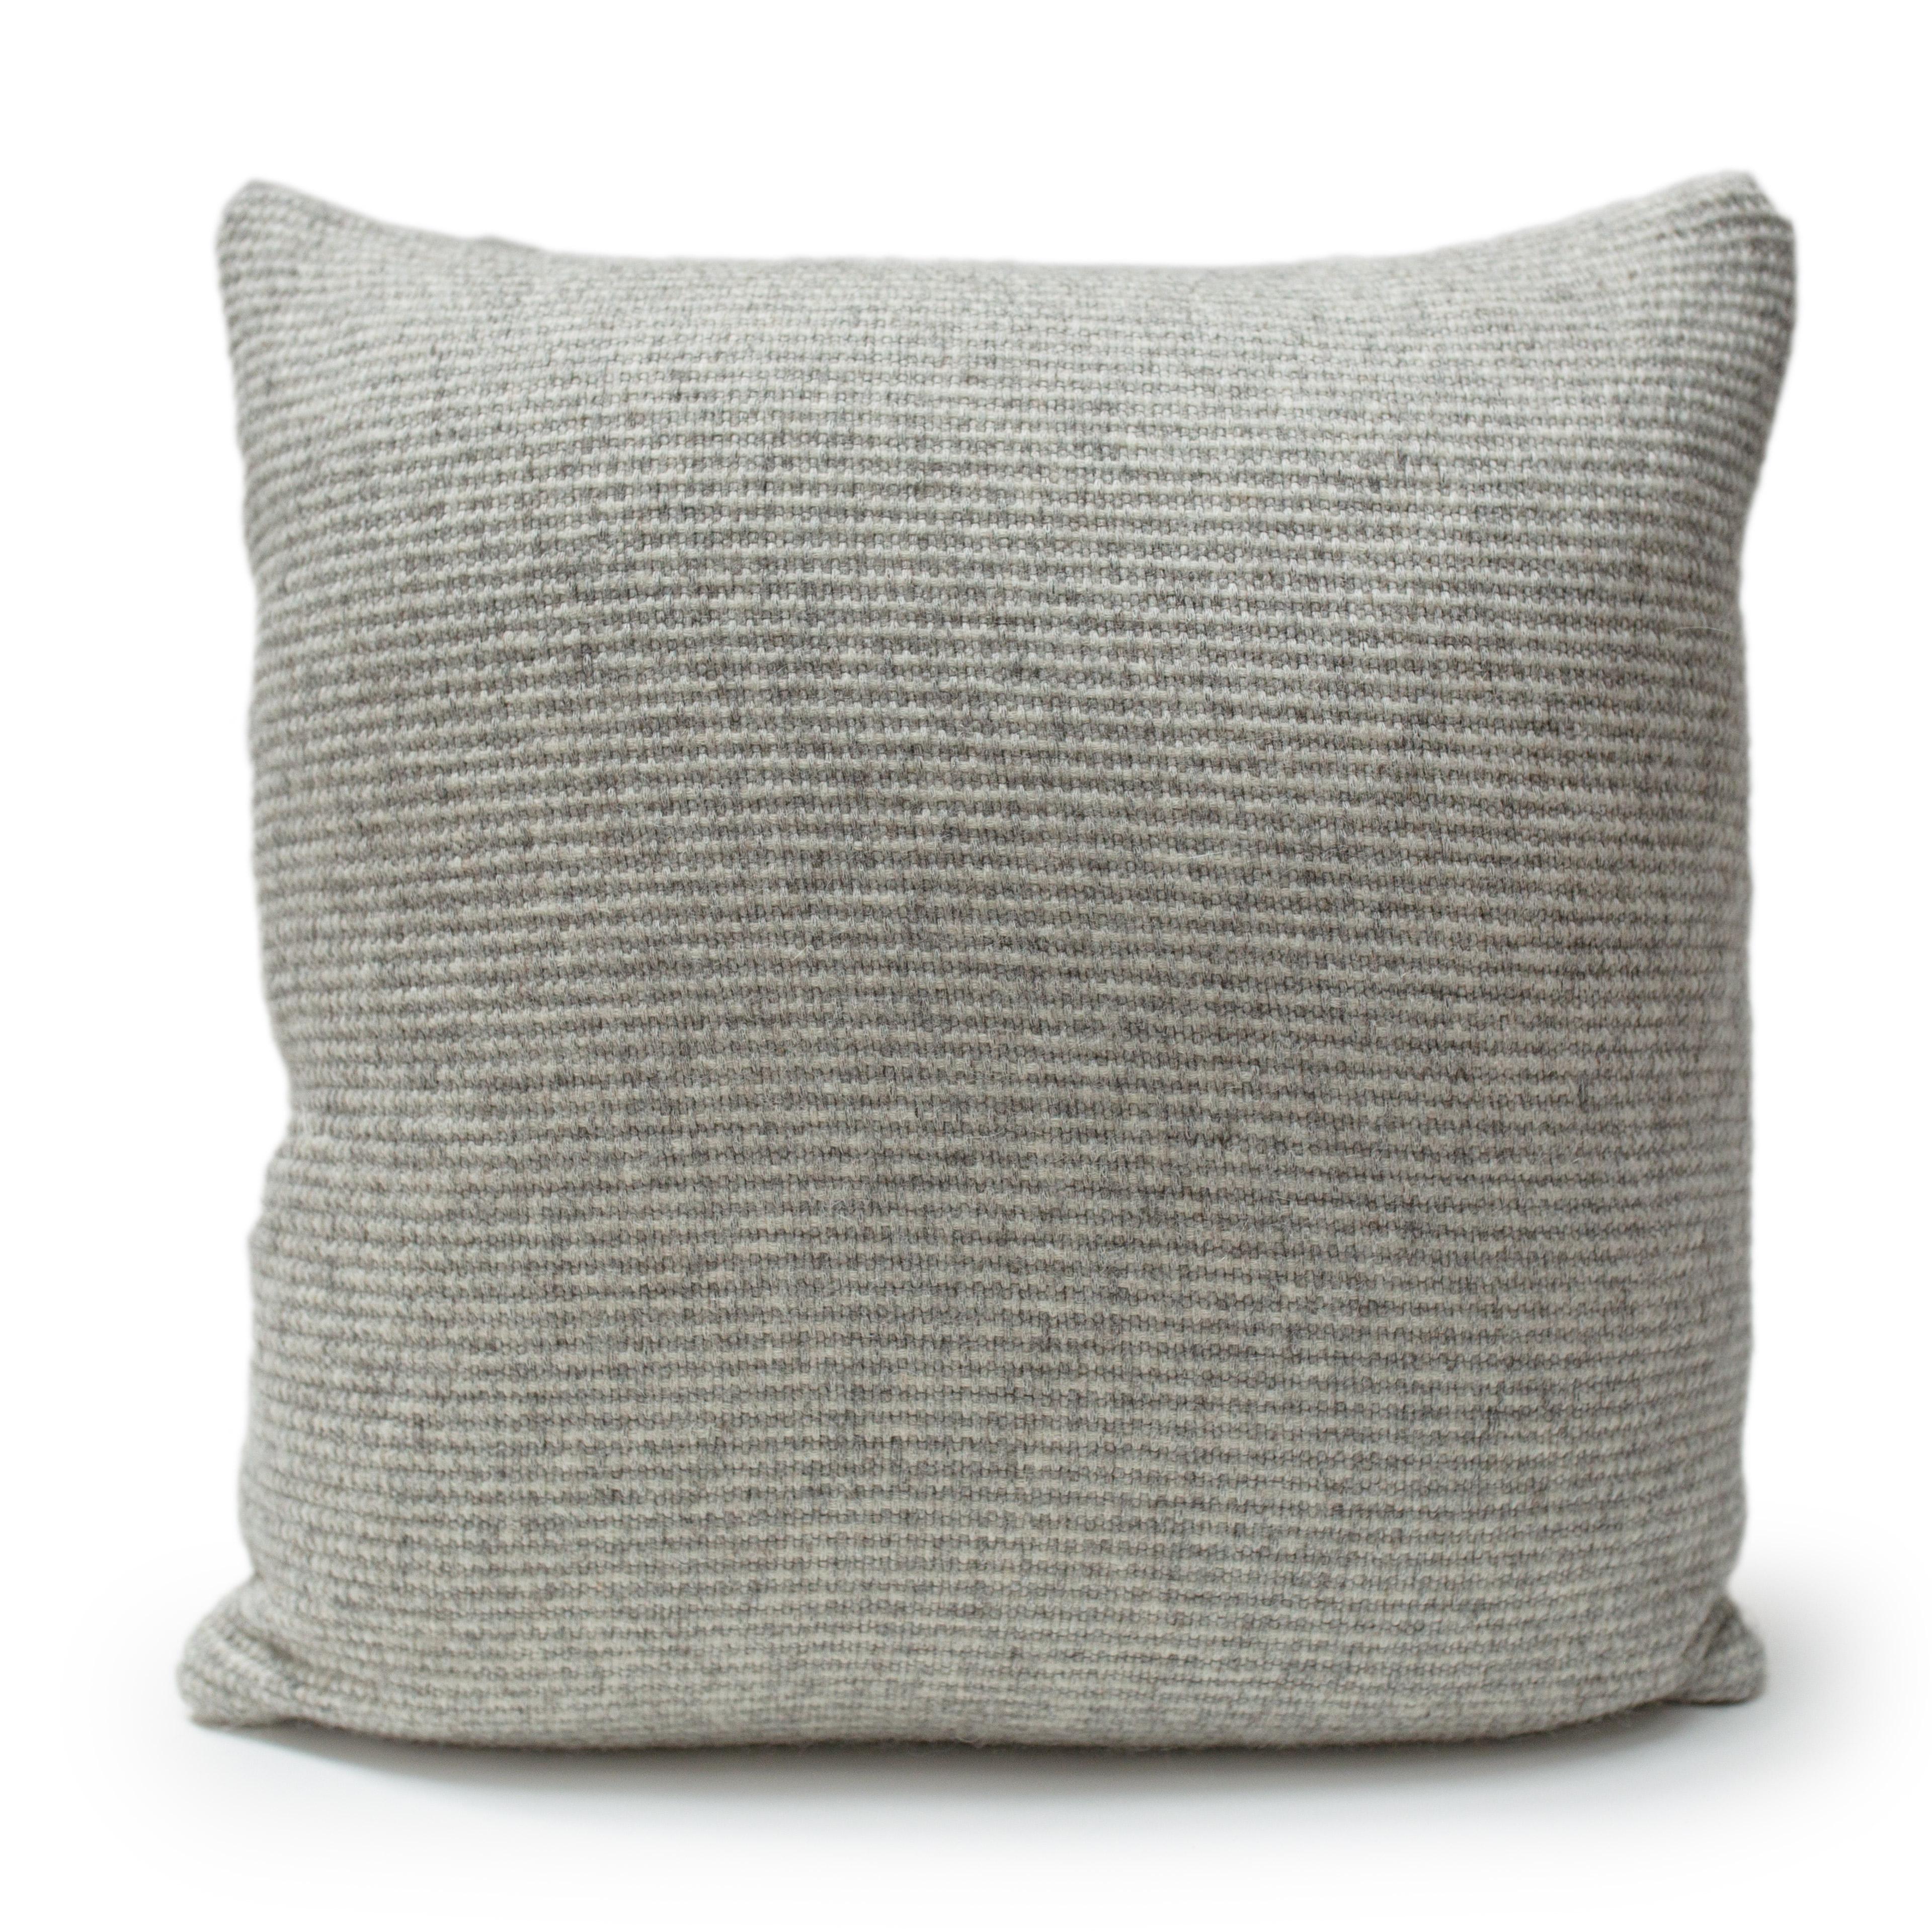 Pillow front in hand-painted, Grey Ribbon felted wool fabric by JG SWITZER, backed with Sandra Jordan Prima Alpaca fabric in Casa Pebble.

Pillow comes with a hidden zipper enclosure and ships with an insert. This is Dry Clean Only.